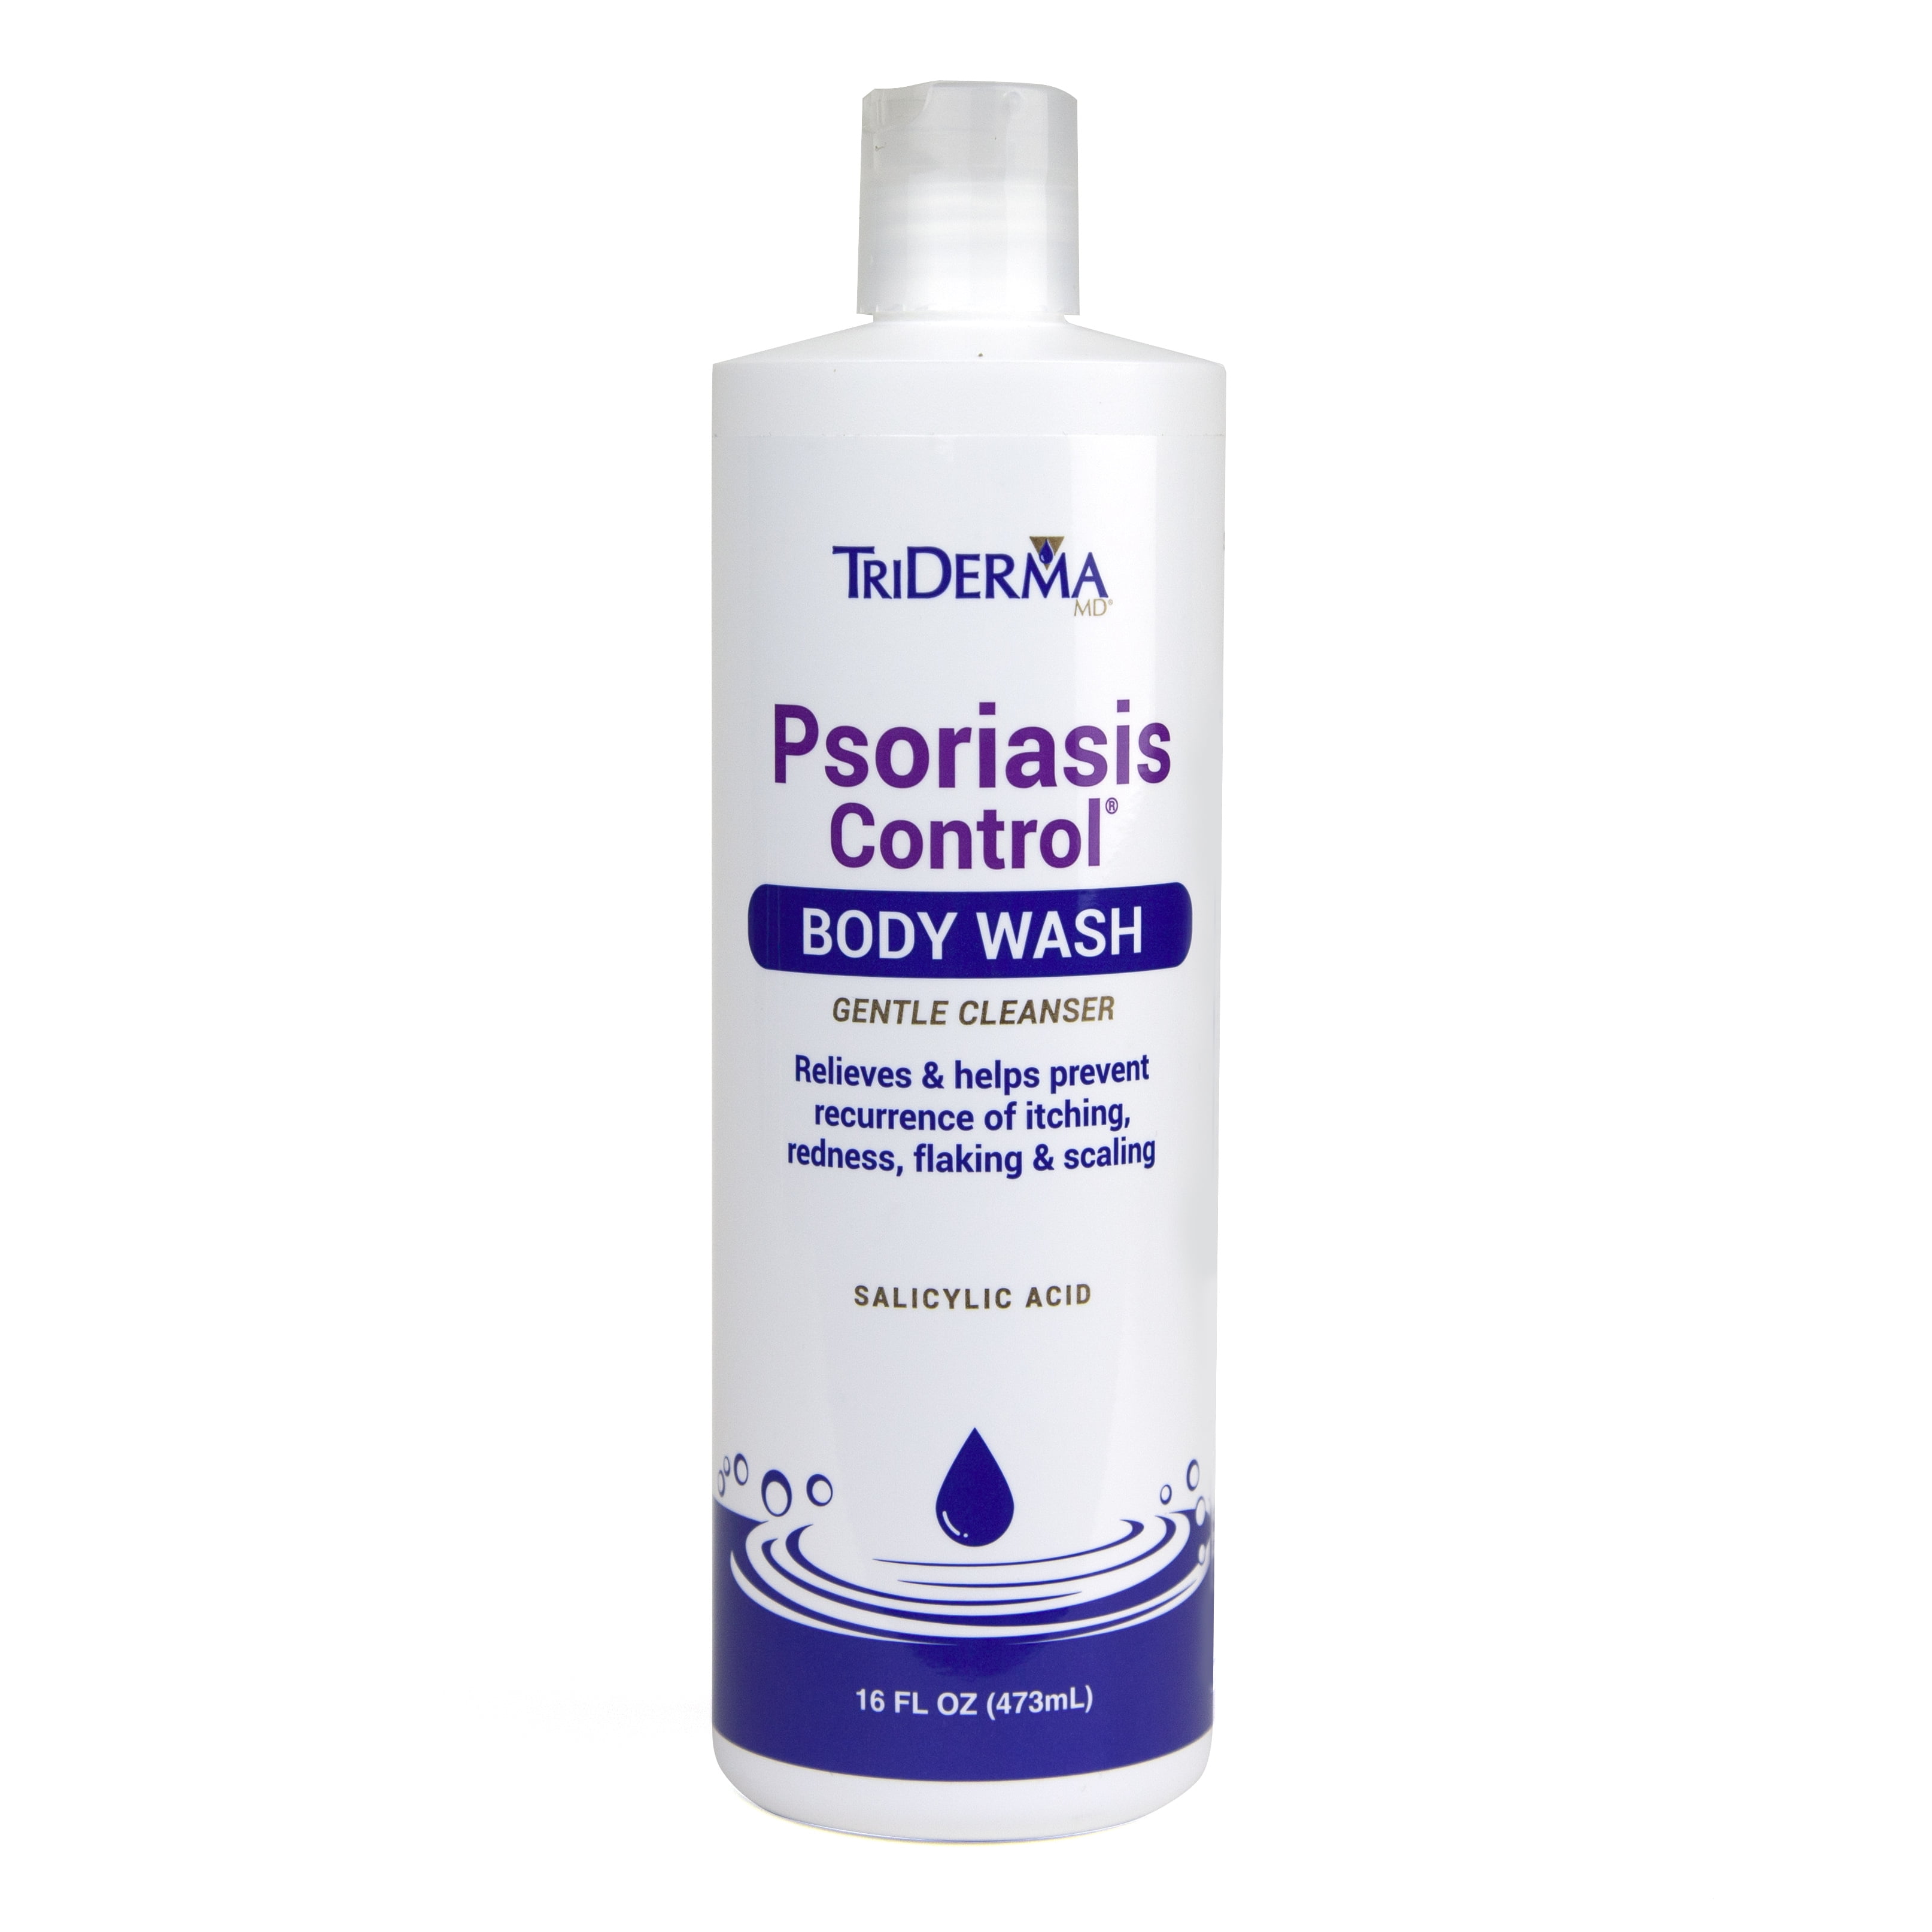 Lotion clean body from psoriasis reviews. Skin Care Reviews